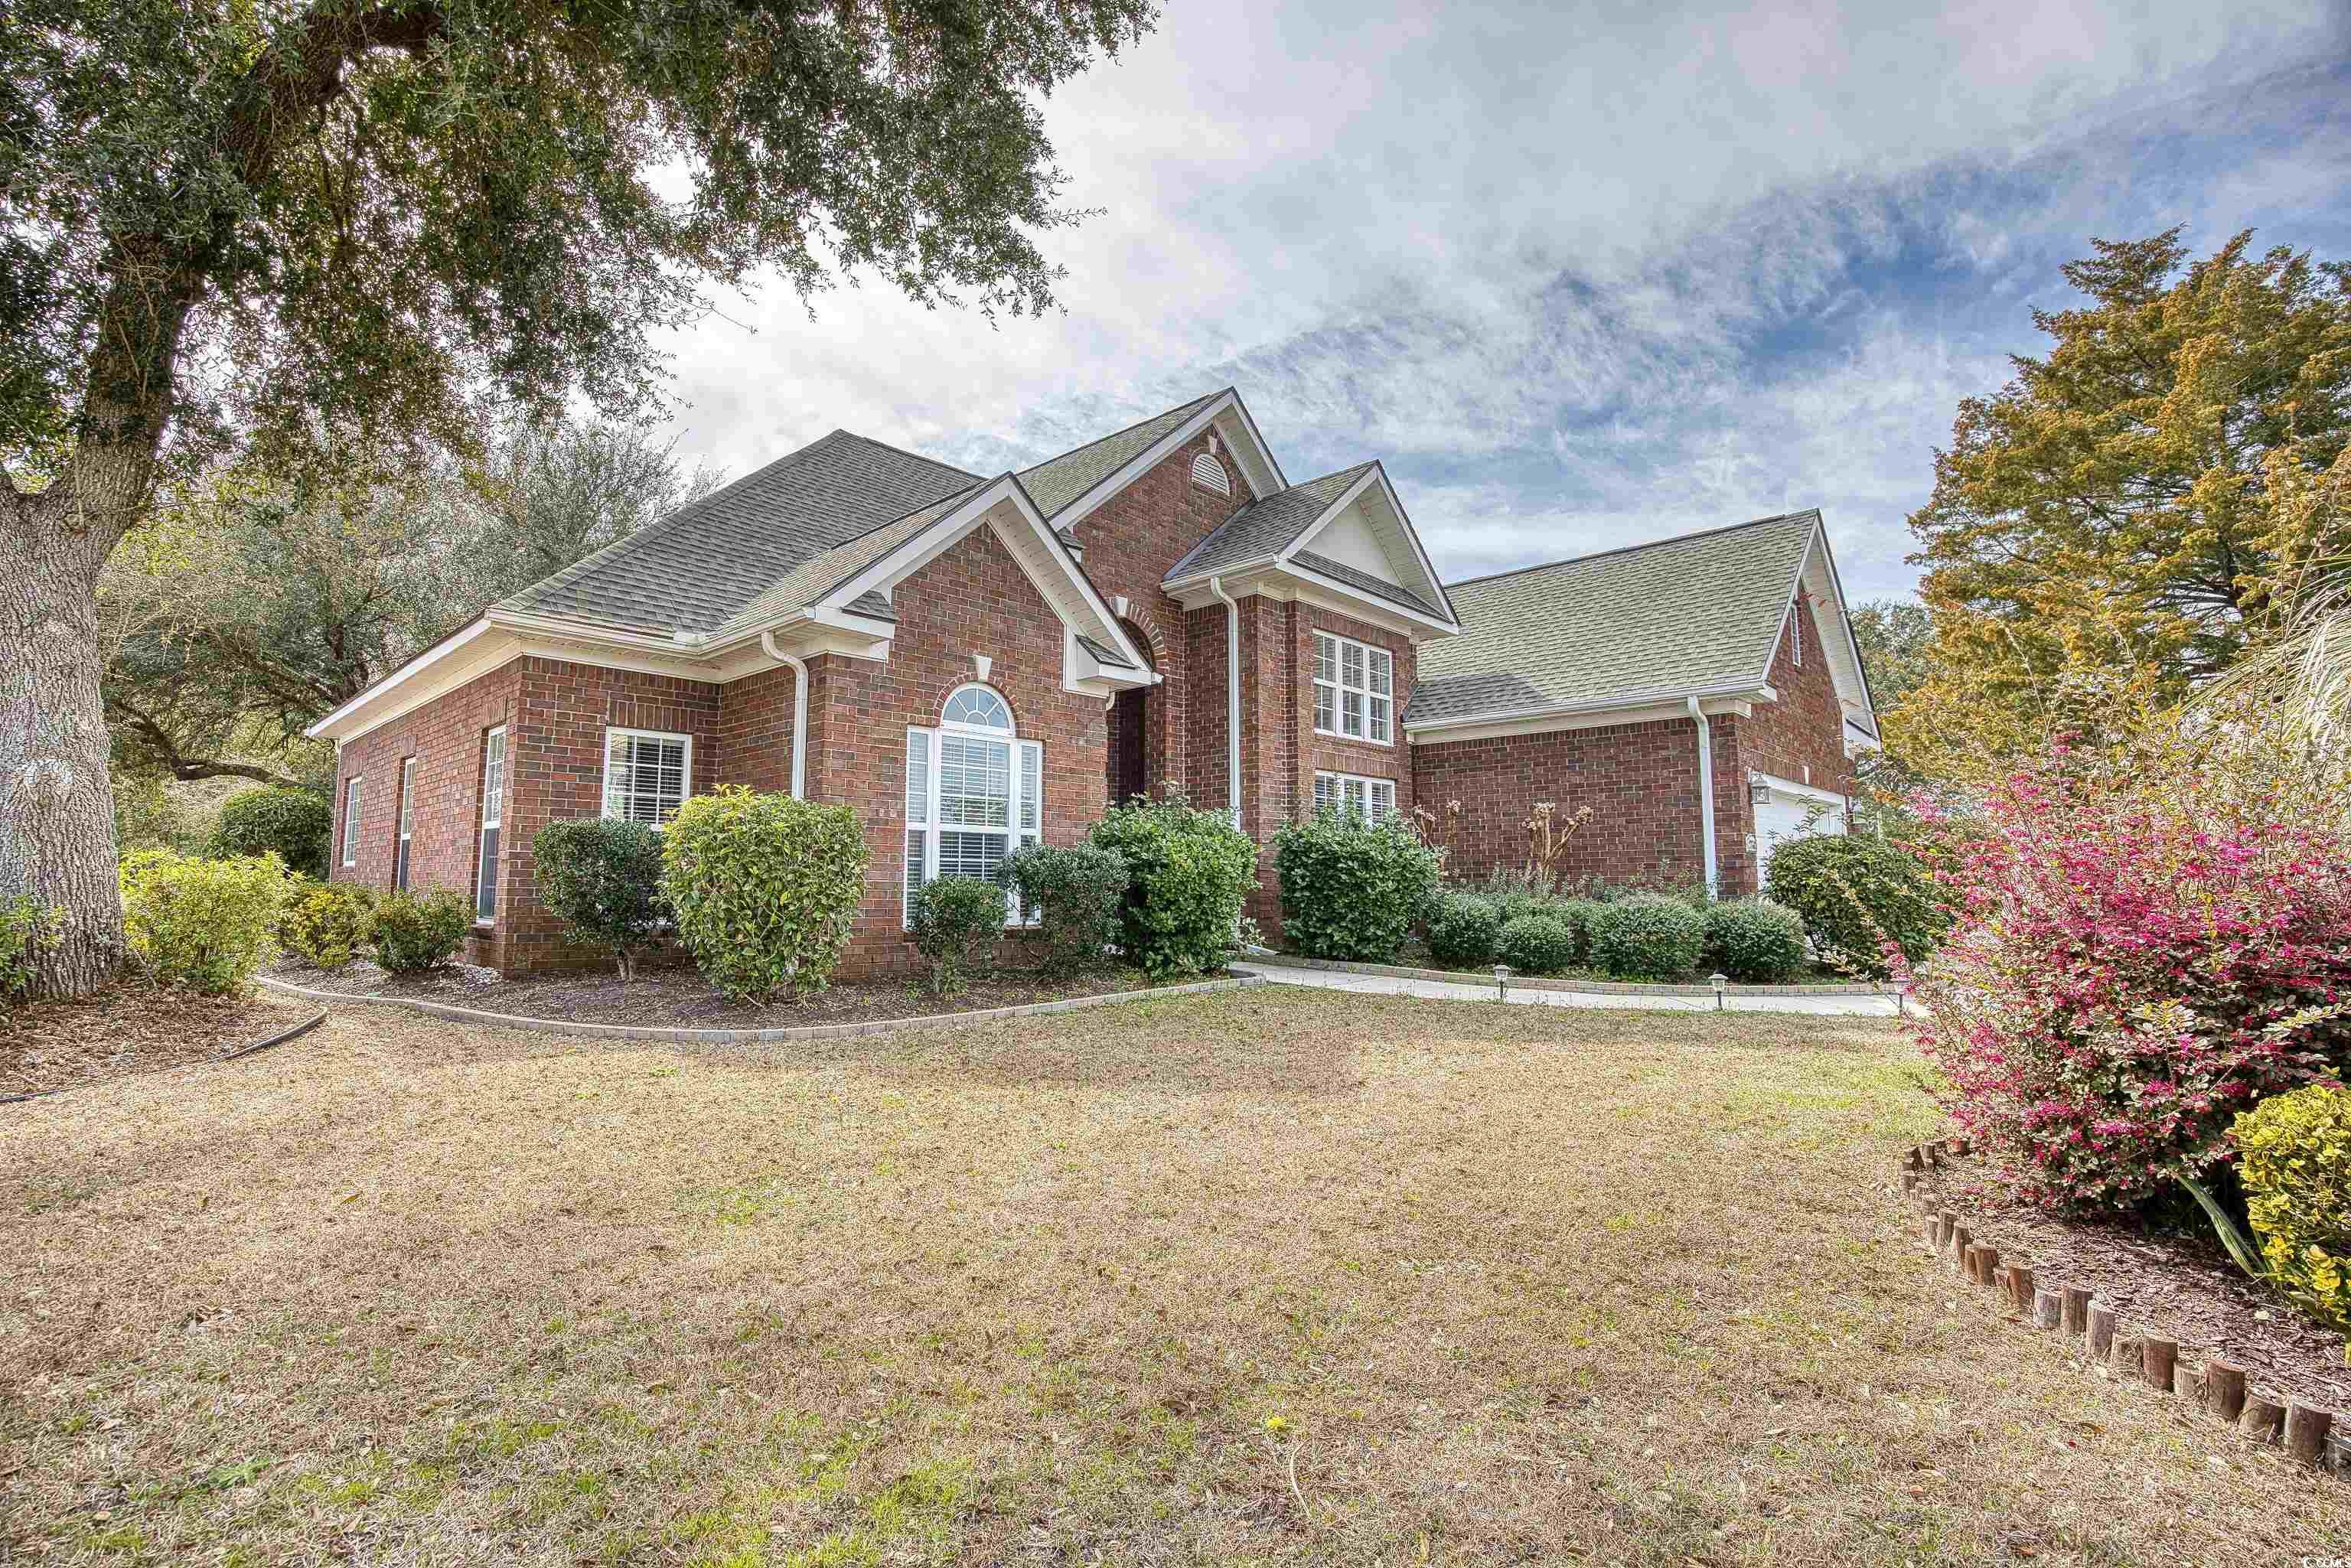 price reduced!!this beautiful single level brick front home is just steps to the atlantic intracoastal waterway and a short 2 mile ride to the beach. large lot with private patio & outdoor fireplace. no hoa dues. high ceilings, new roof 2023, split floor plan, eat in kitchen and formal dining area, wood floors in great room & formal dining area and italian tile floors in kitchen and breakfast area. perfect size & location!